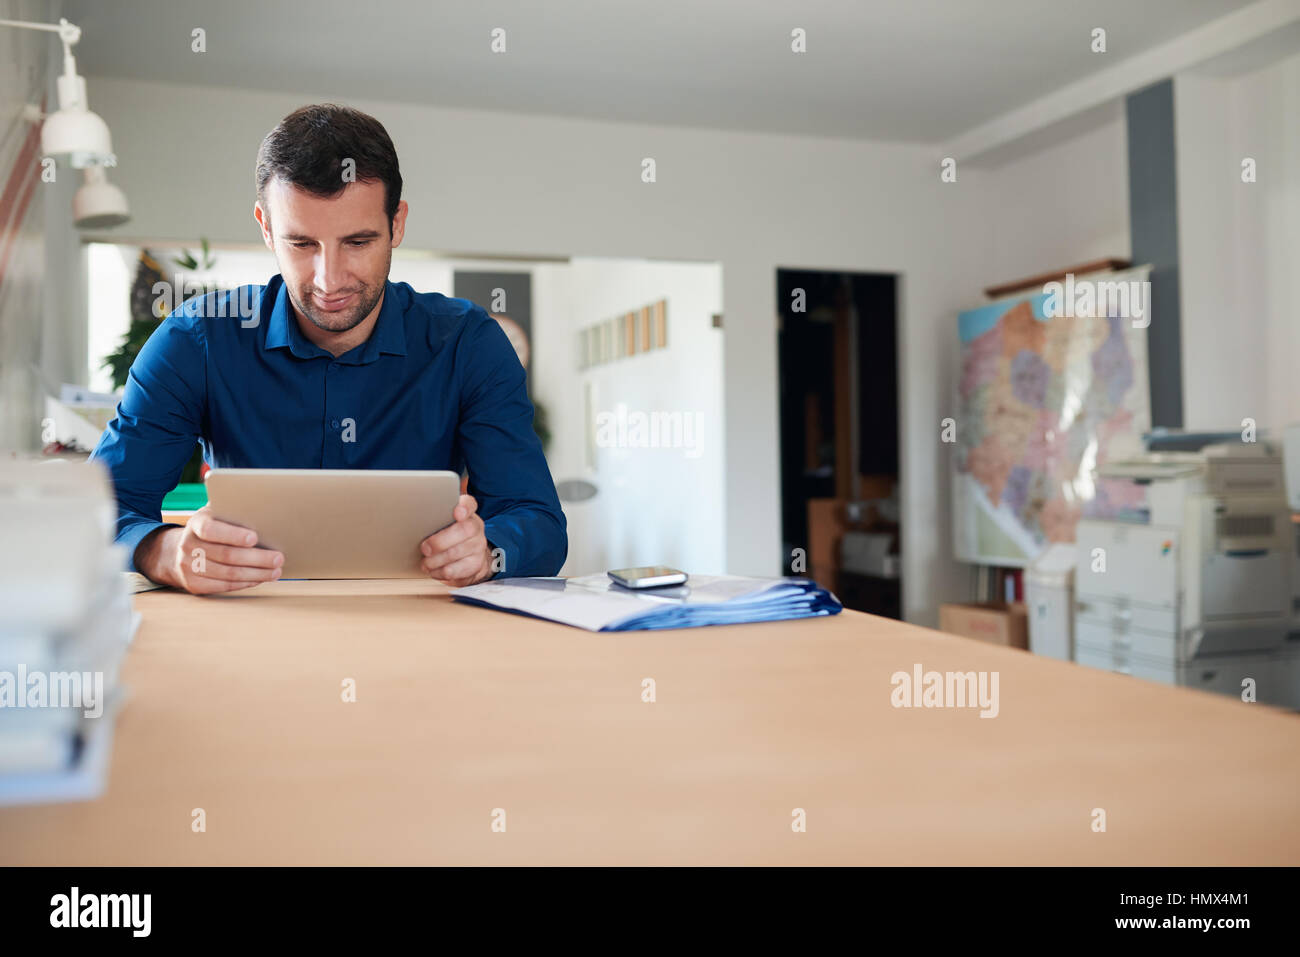 Successful businessman at work on digital tablet in an office Stock Photo